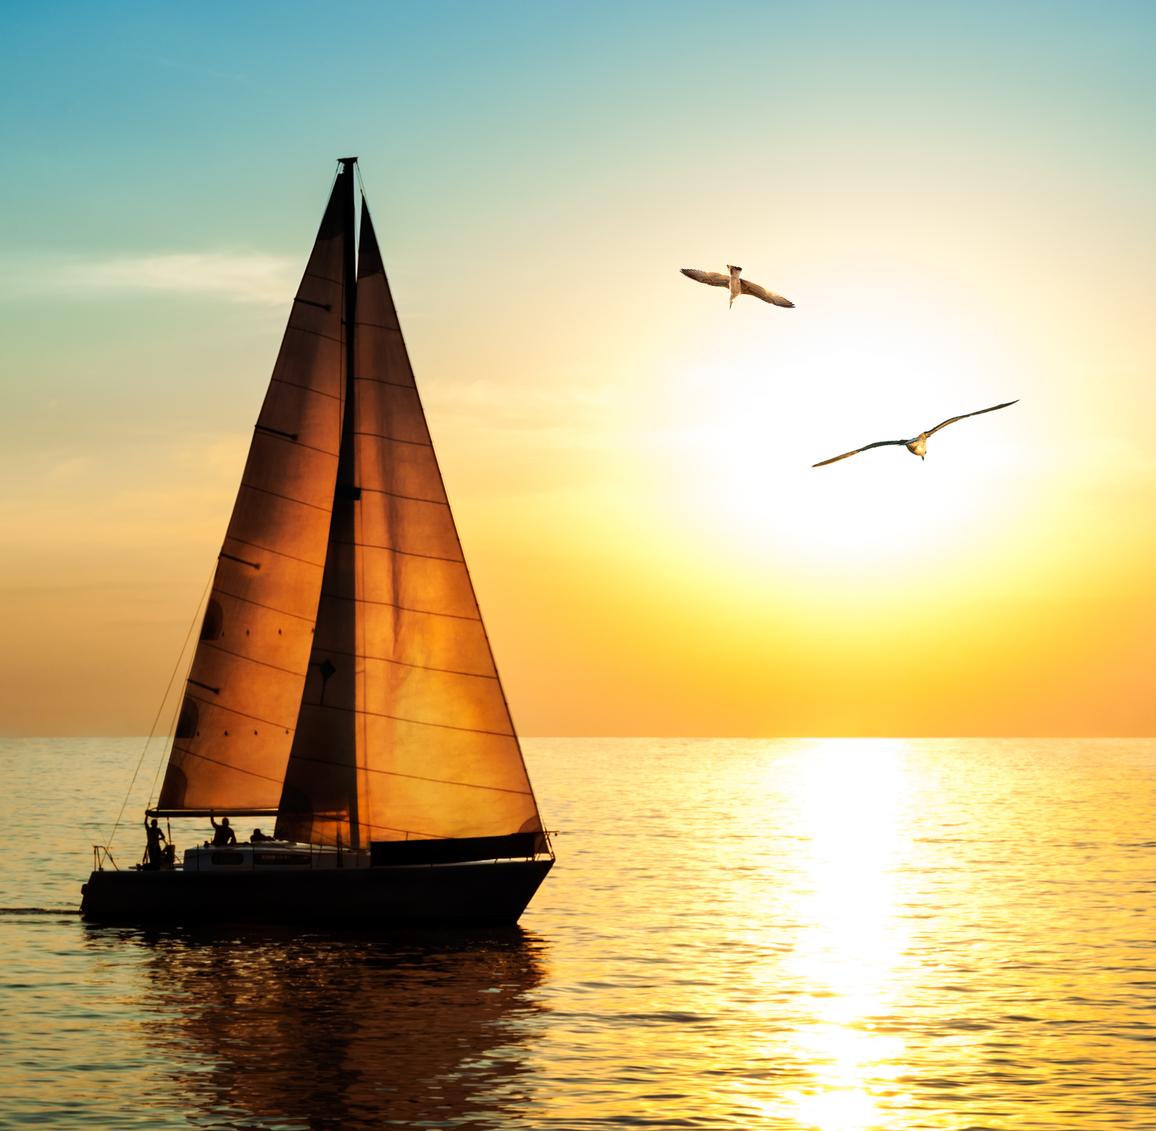 Sailboat at sunset with seagulls